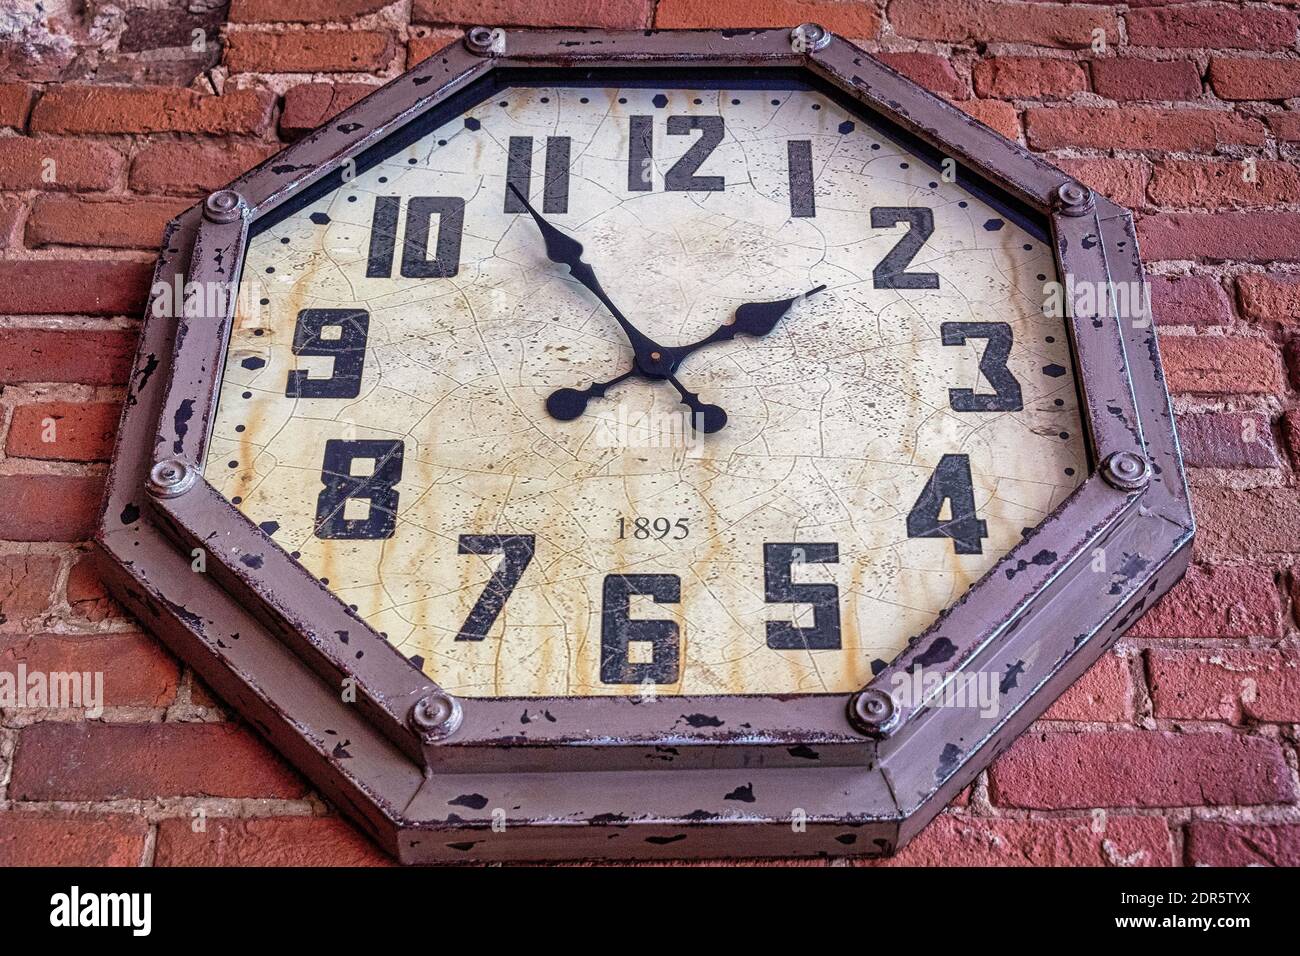 Old vintage wall clock, low angle view Stock Photo